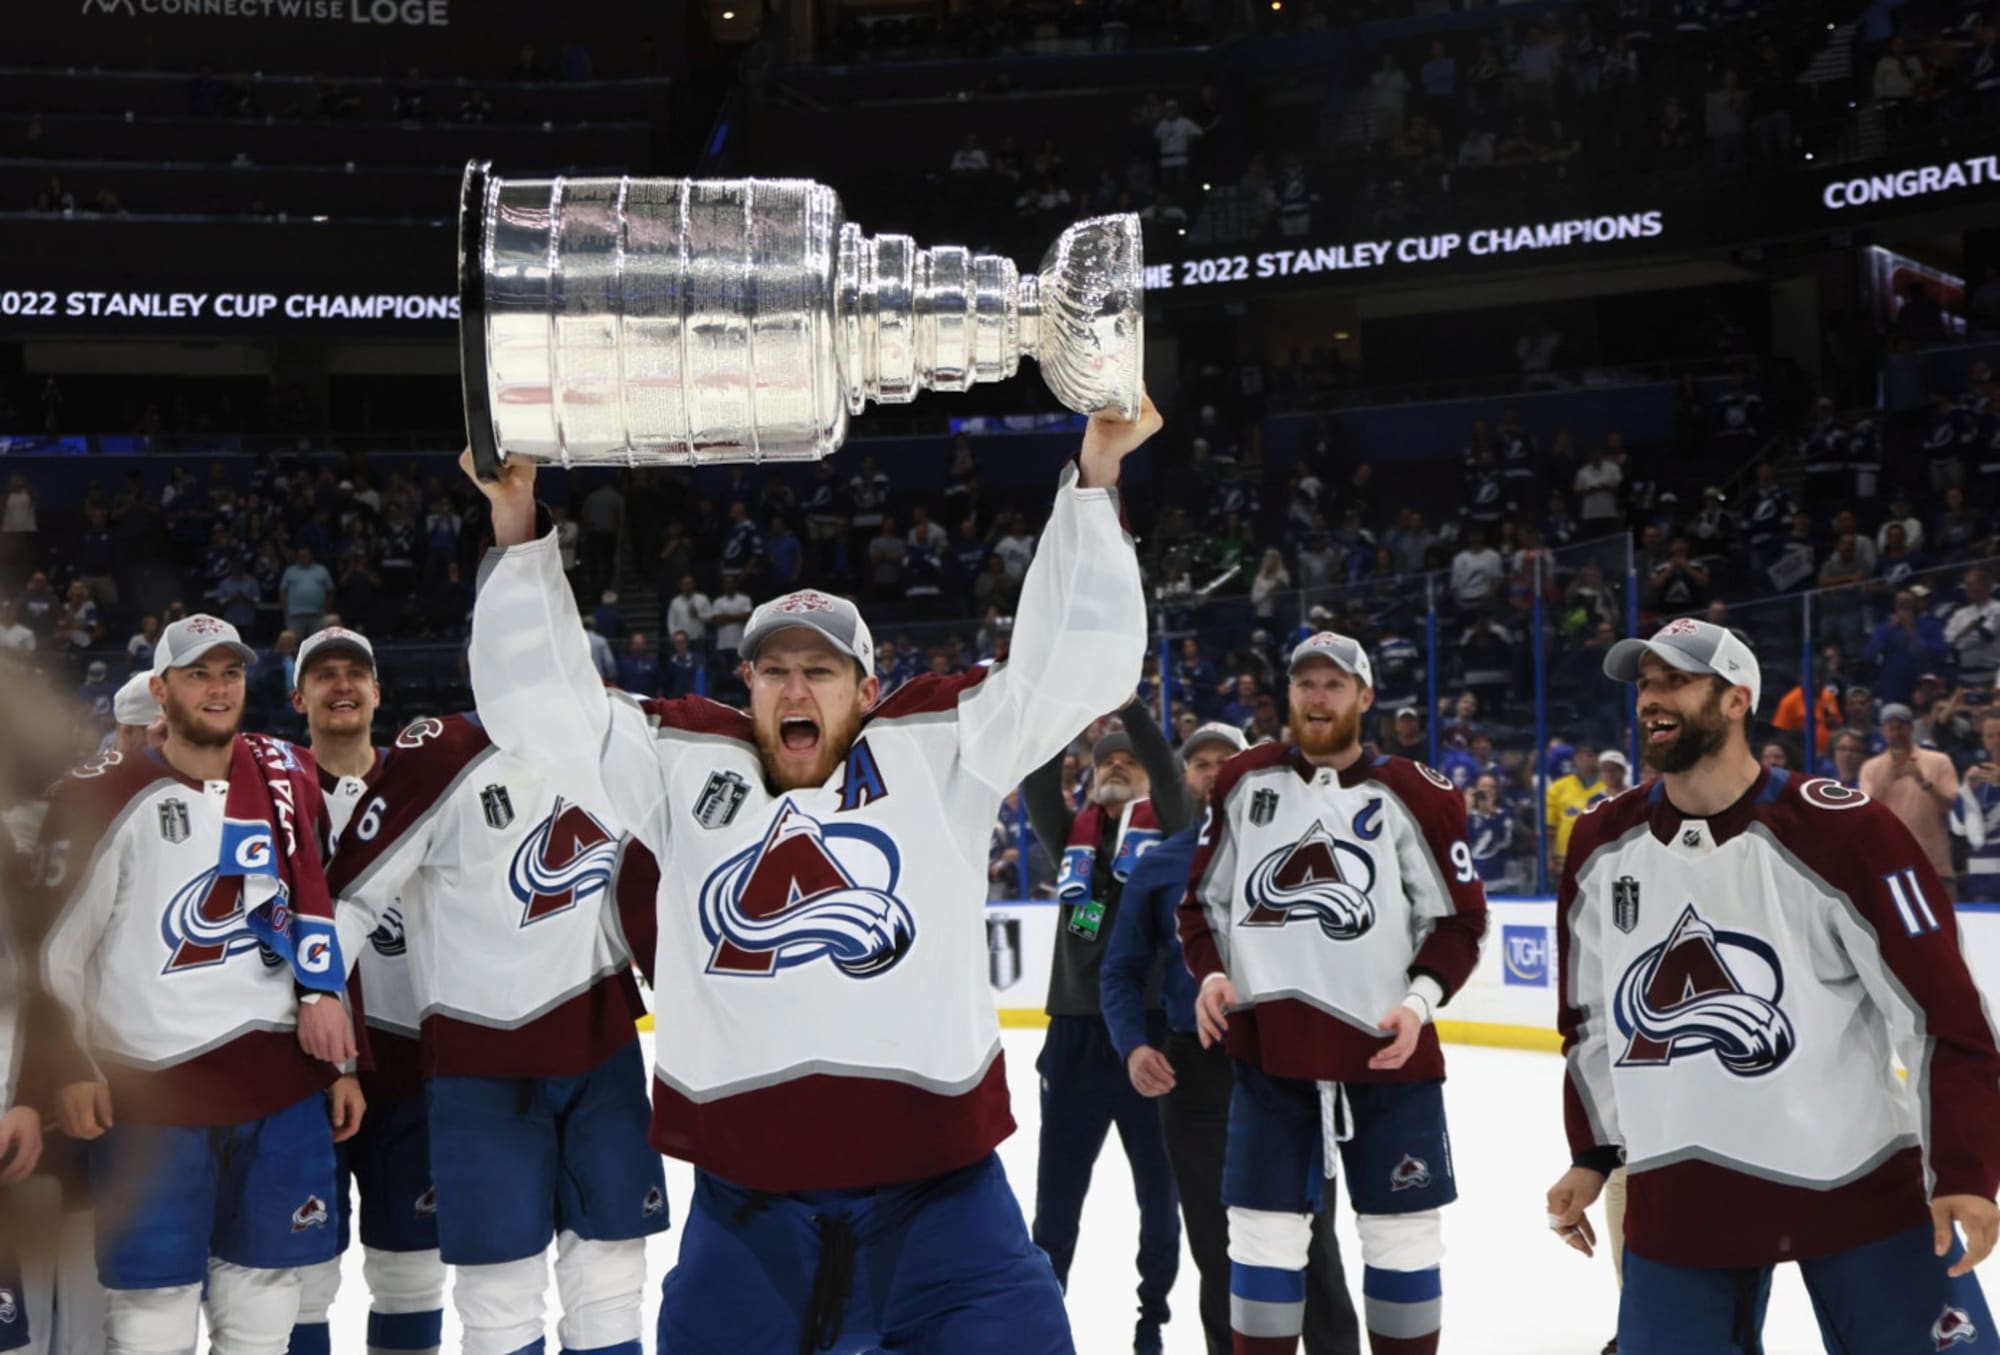 Which US #NHL team has APPEARED in the most Stanley Cup Finals